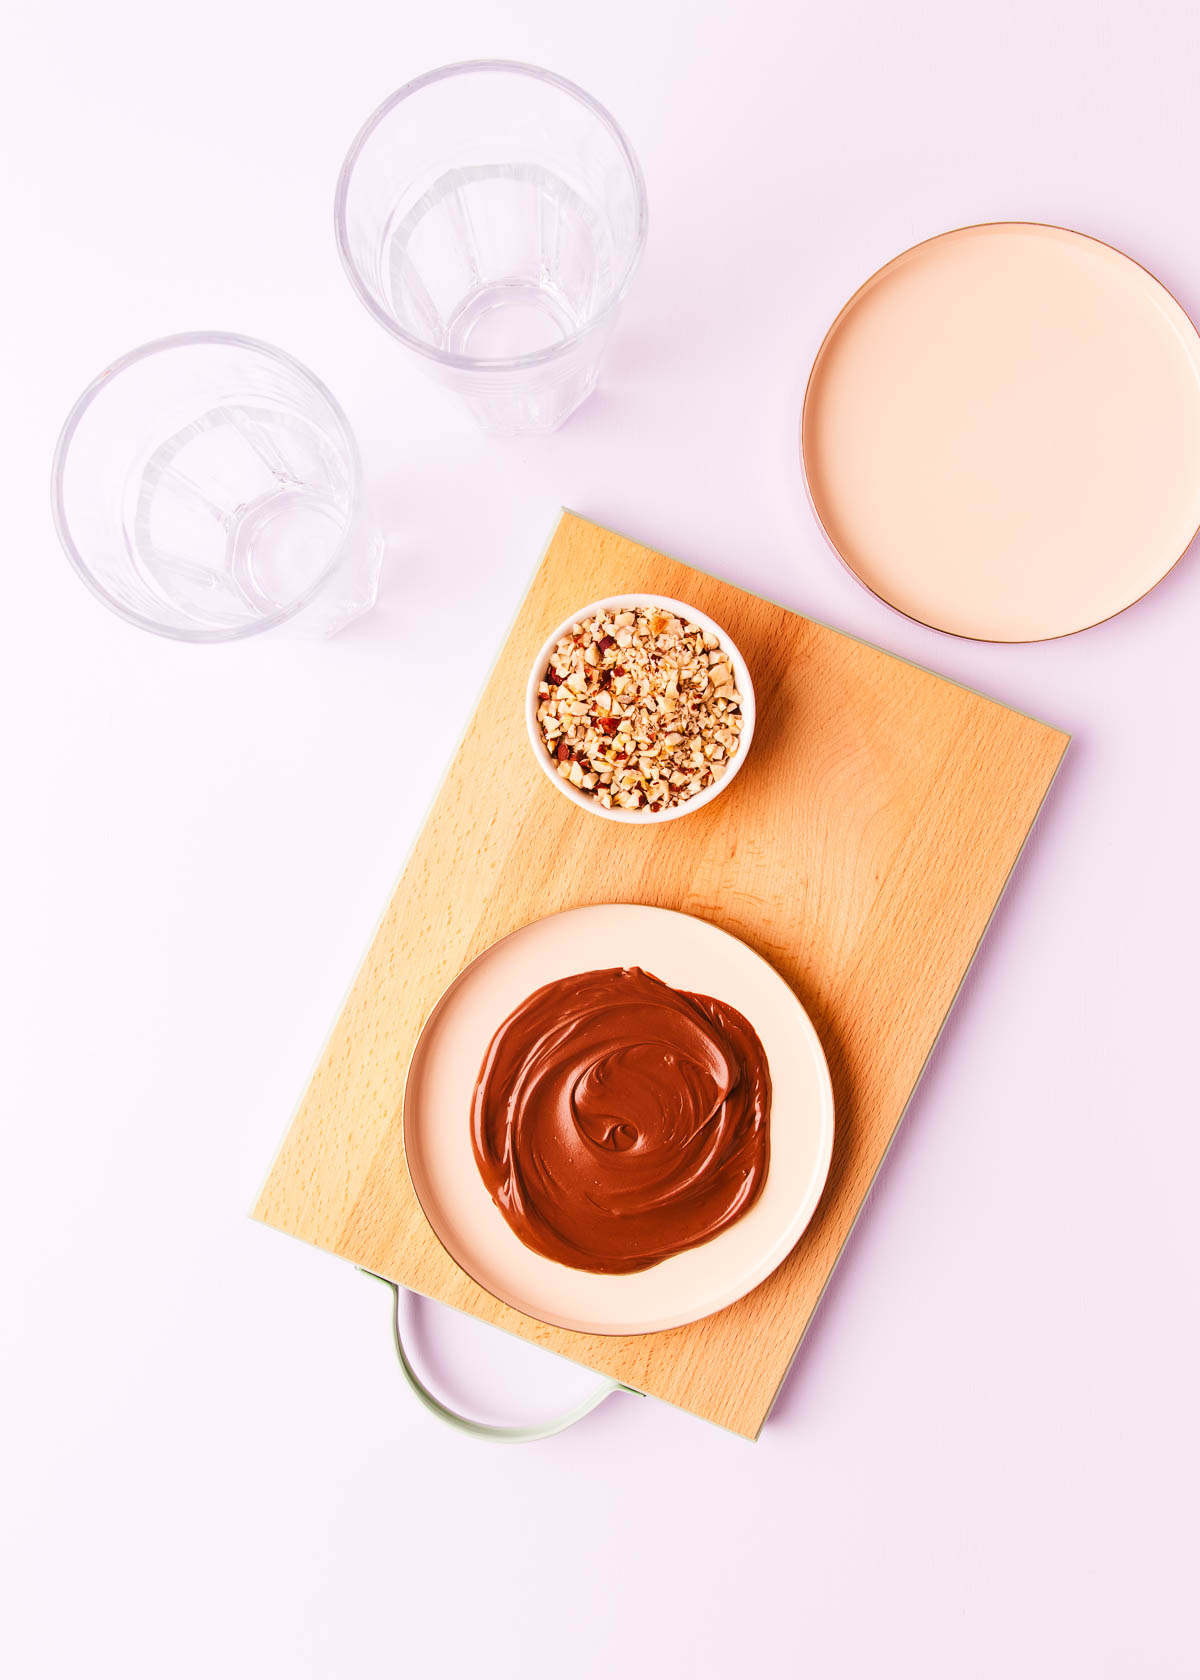 Softened Nutella spread onto a flat pink plate, with two tall empty glasses, on a pale purple background.